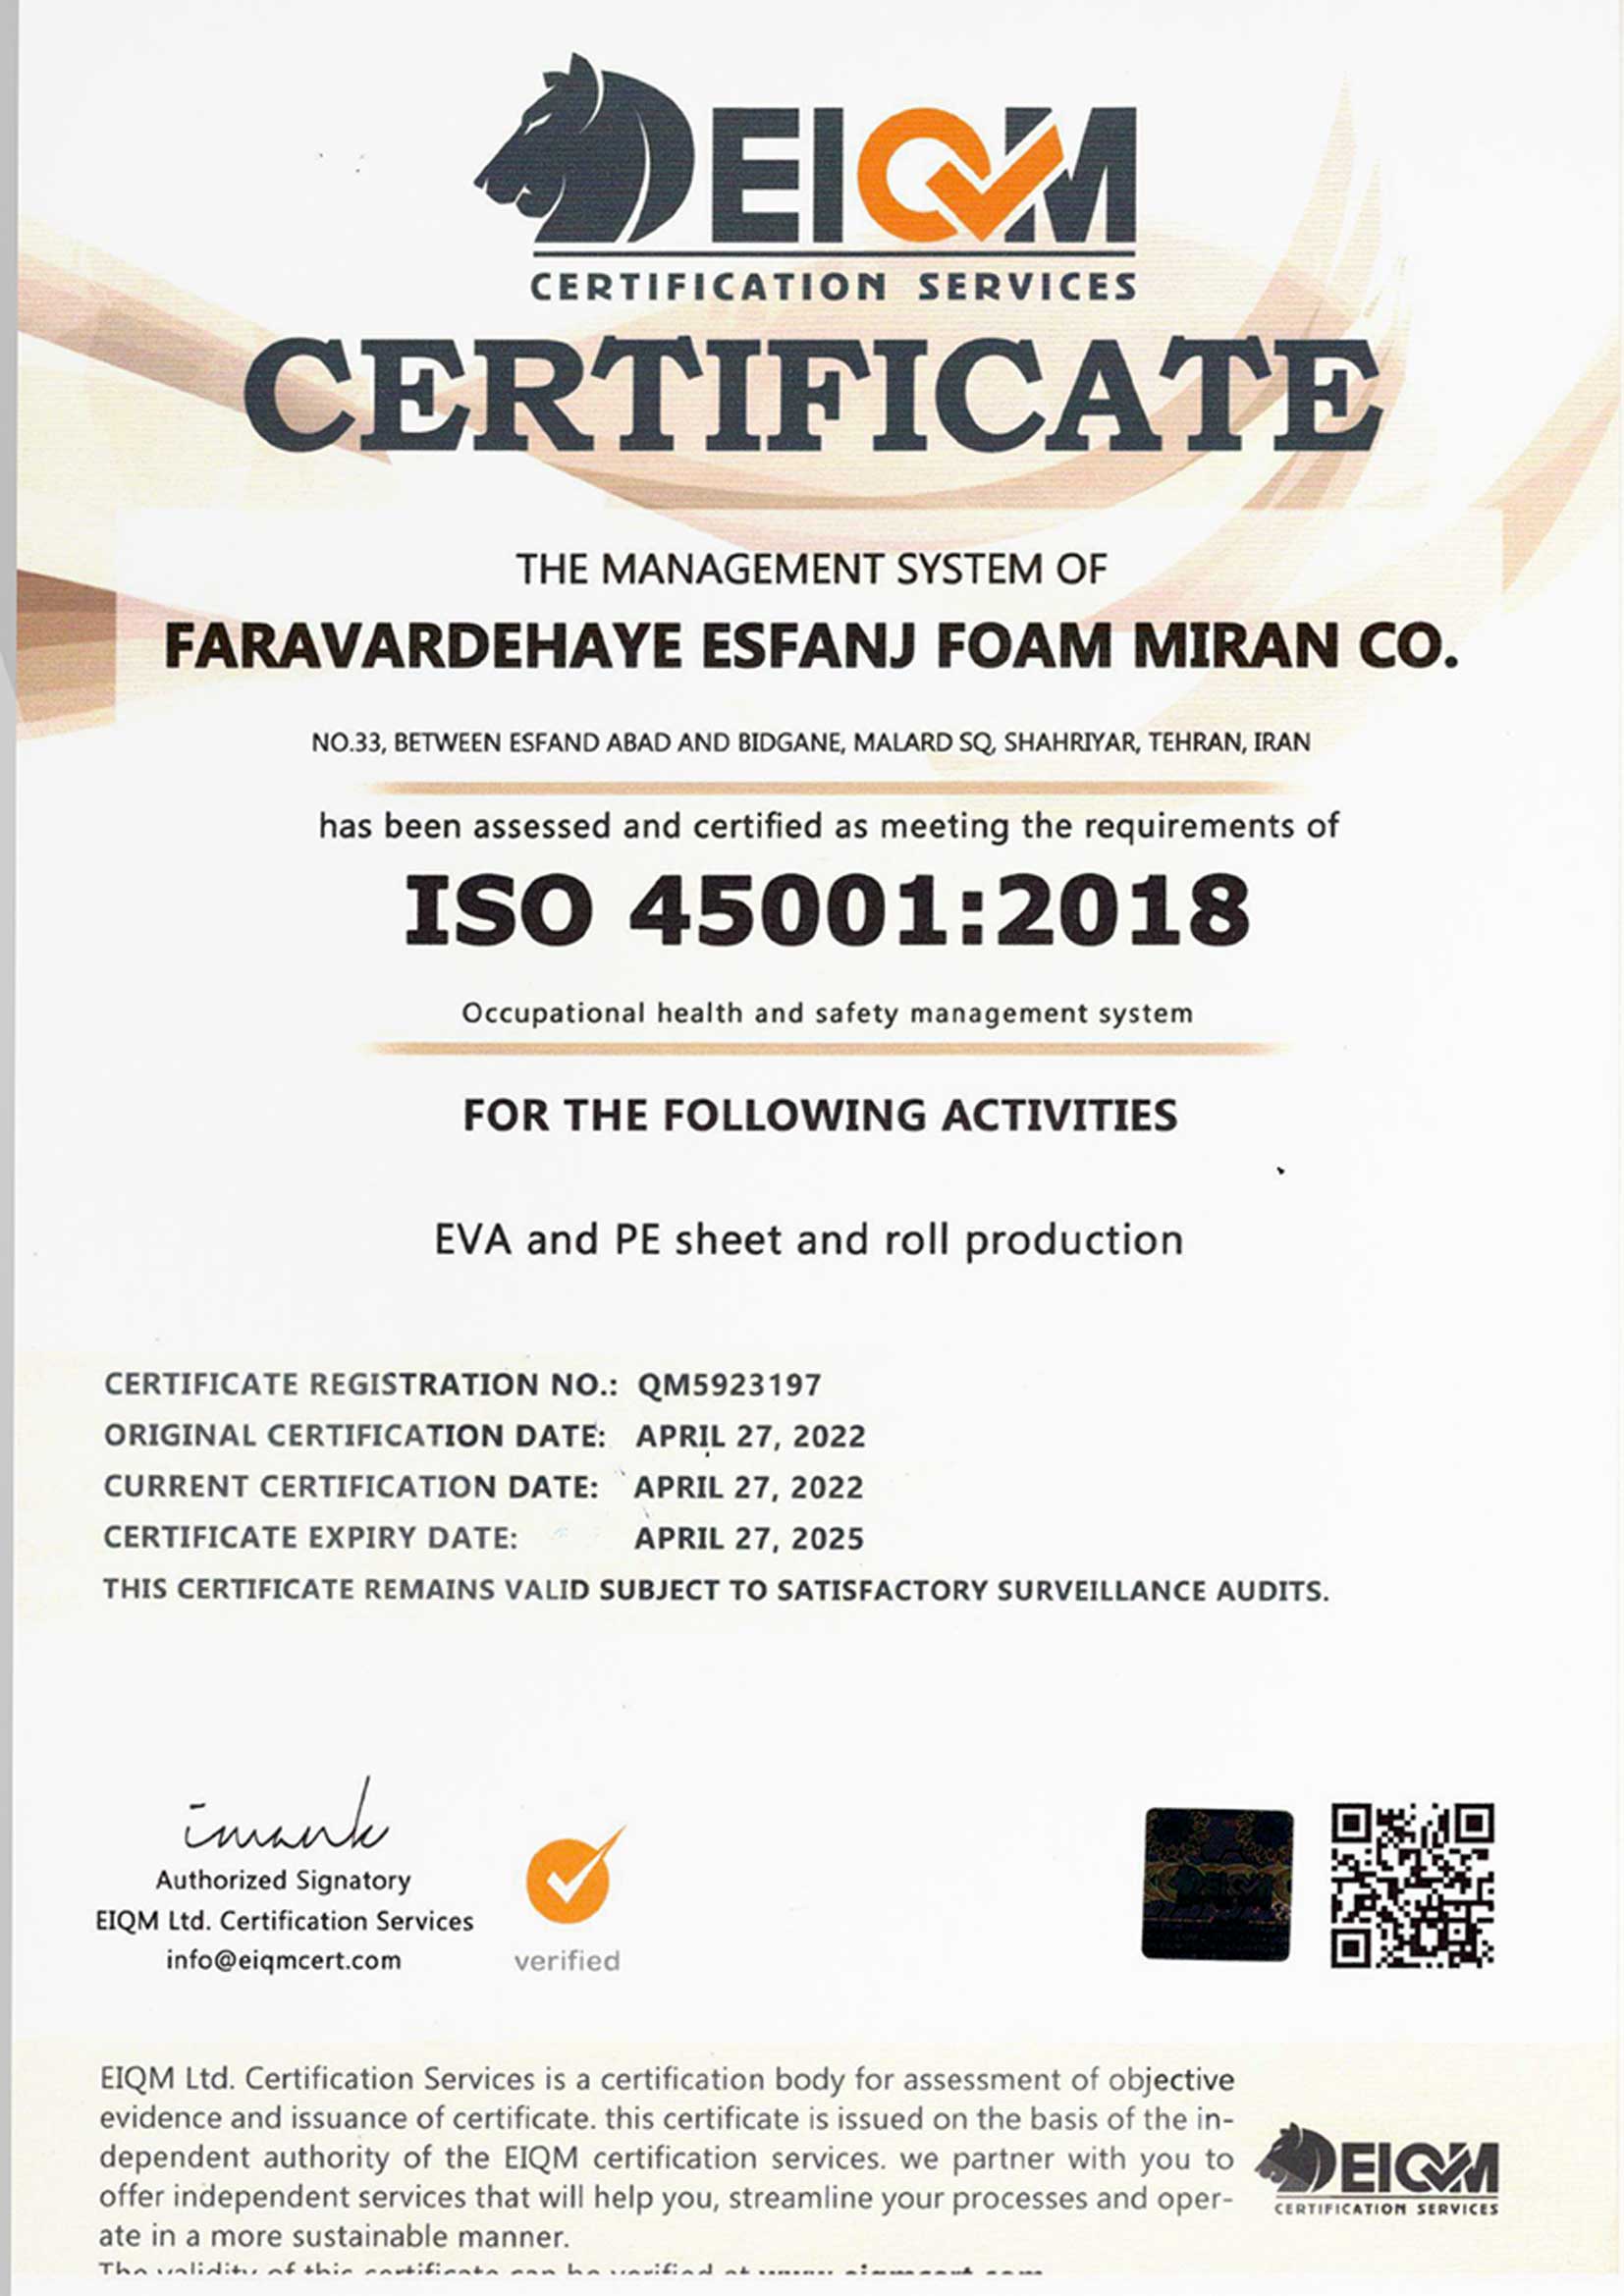 ISO45001 occupational health and safety certificate